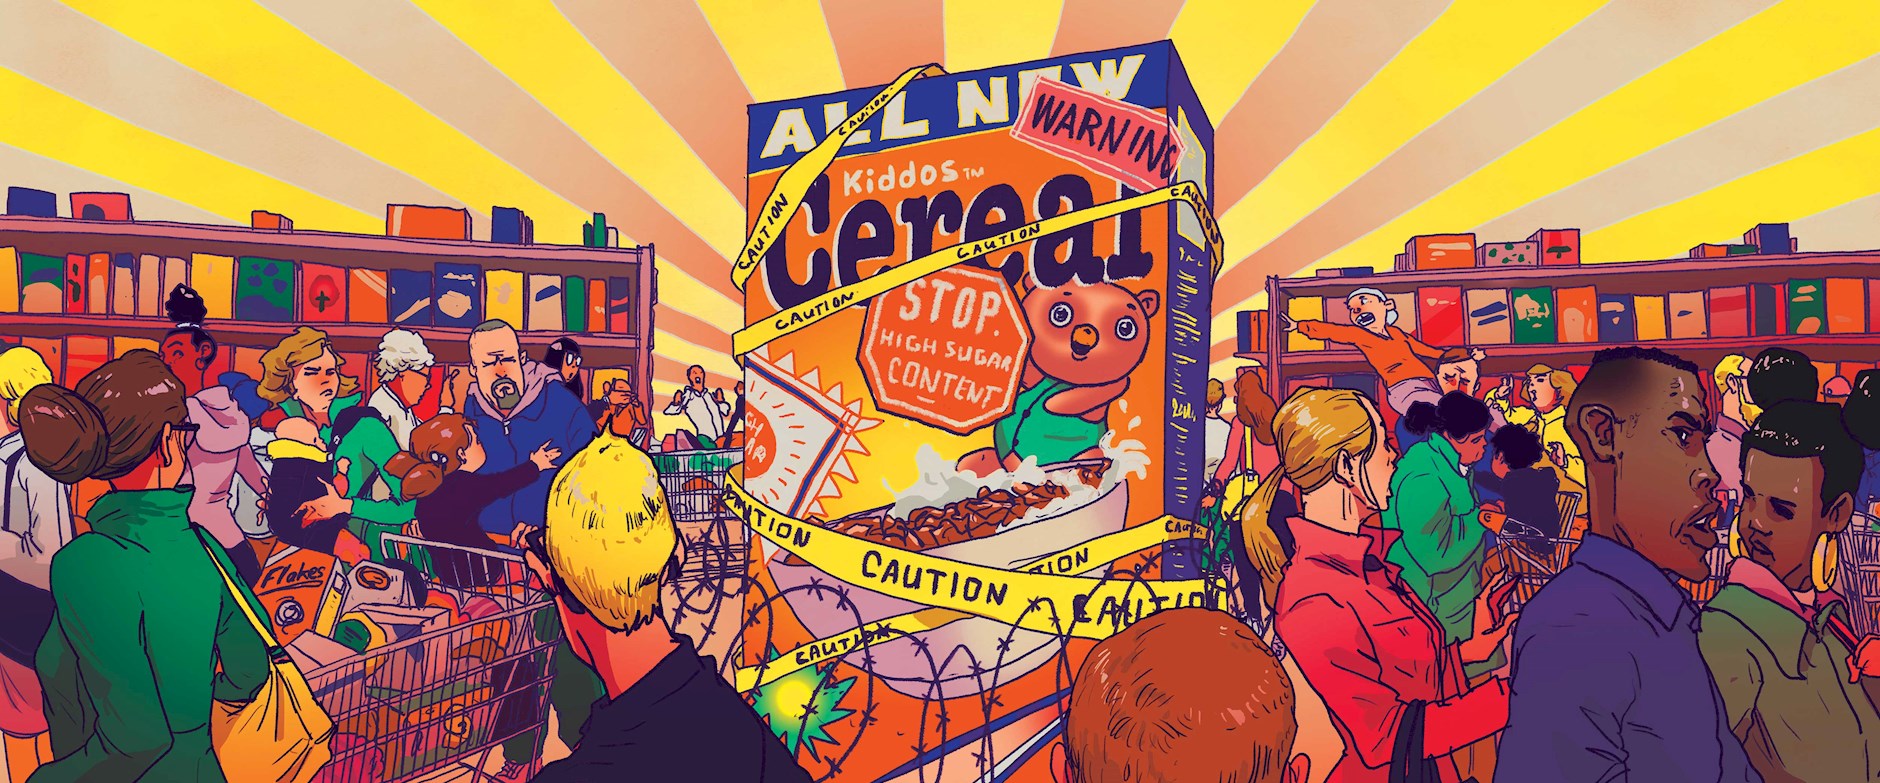 People avoiding a cereal box with a warning label